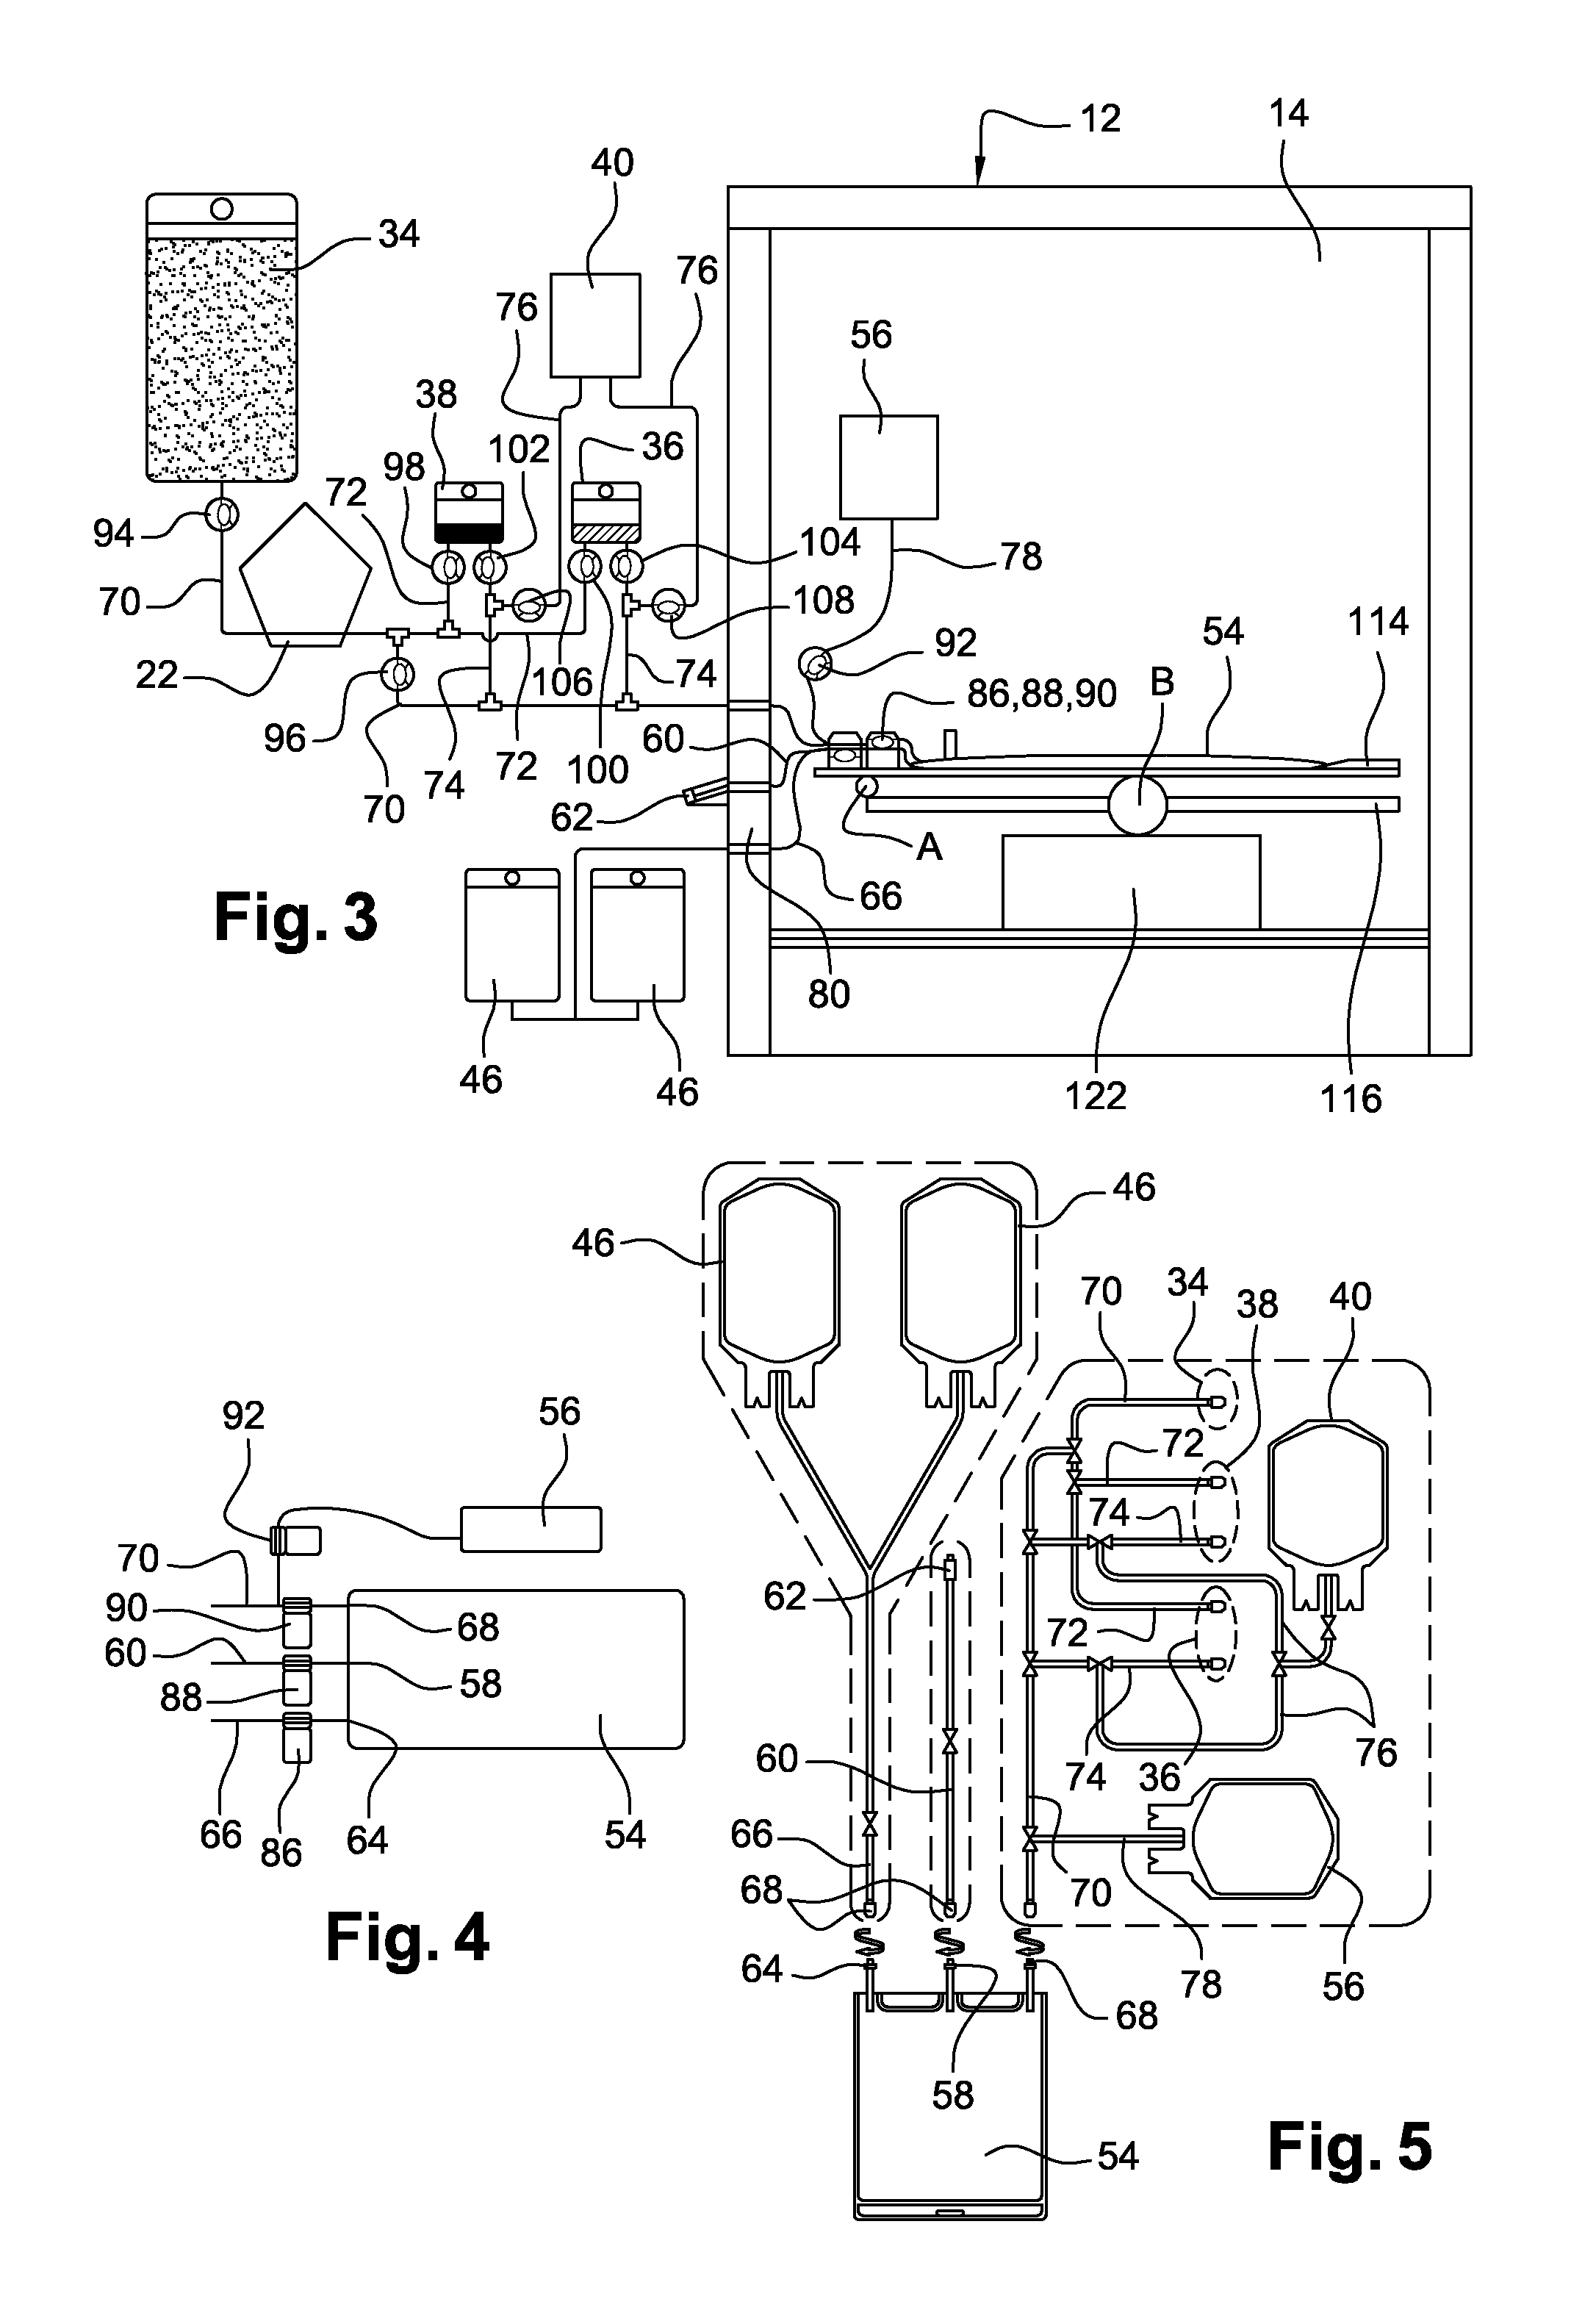 Automated apparatus and method of cell culture